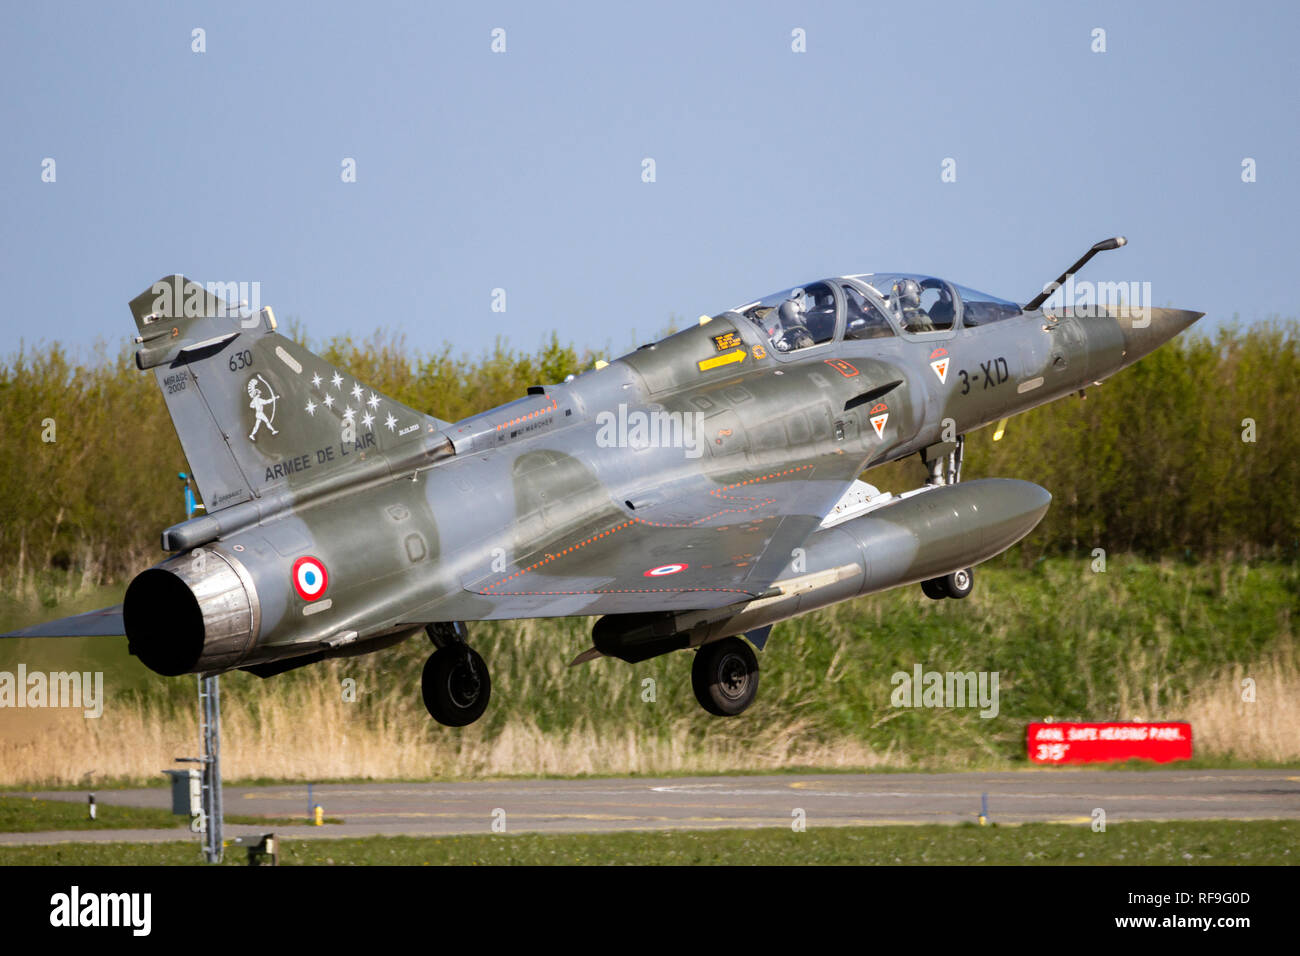 LEEUWARDEN, THE NETHERLANDS - APR 21, 2016: French Air Force Dassault Mirage 2000D fighter jet plane from Escadron de Chasse 2/3 landing on Leeuwarden Stock Photo